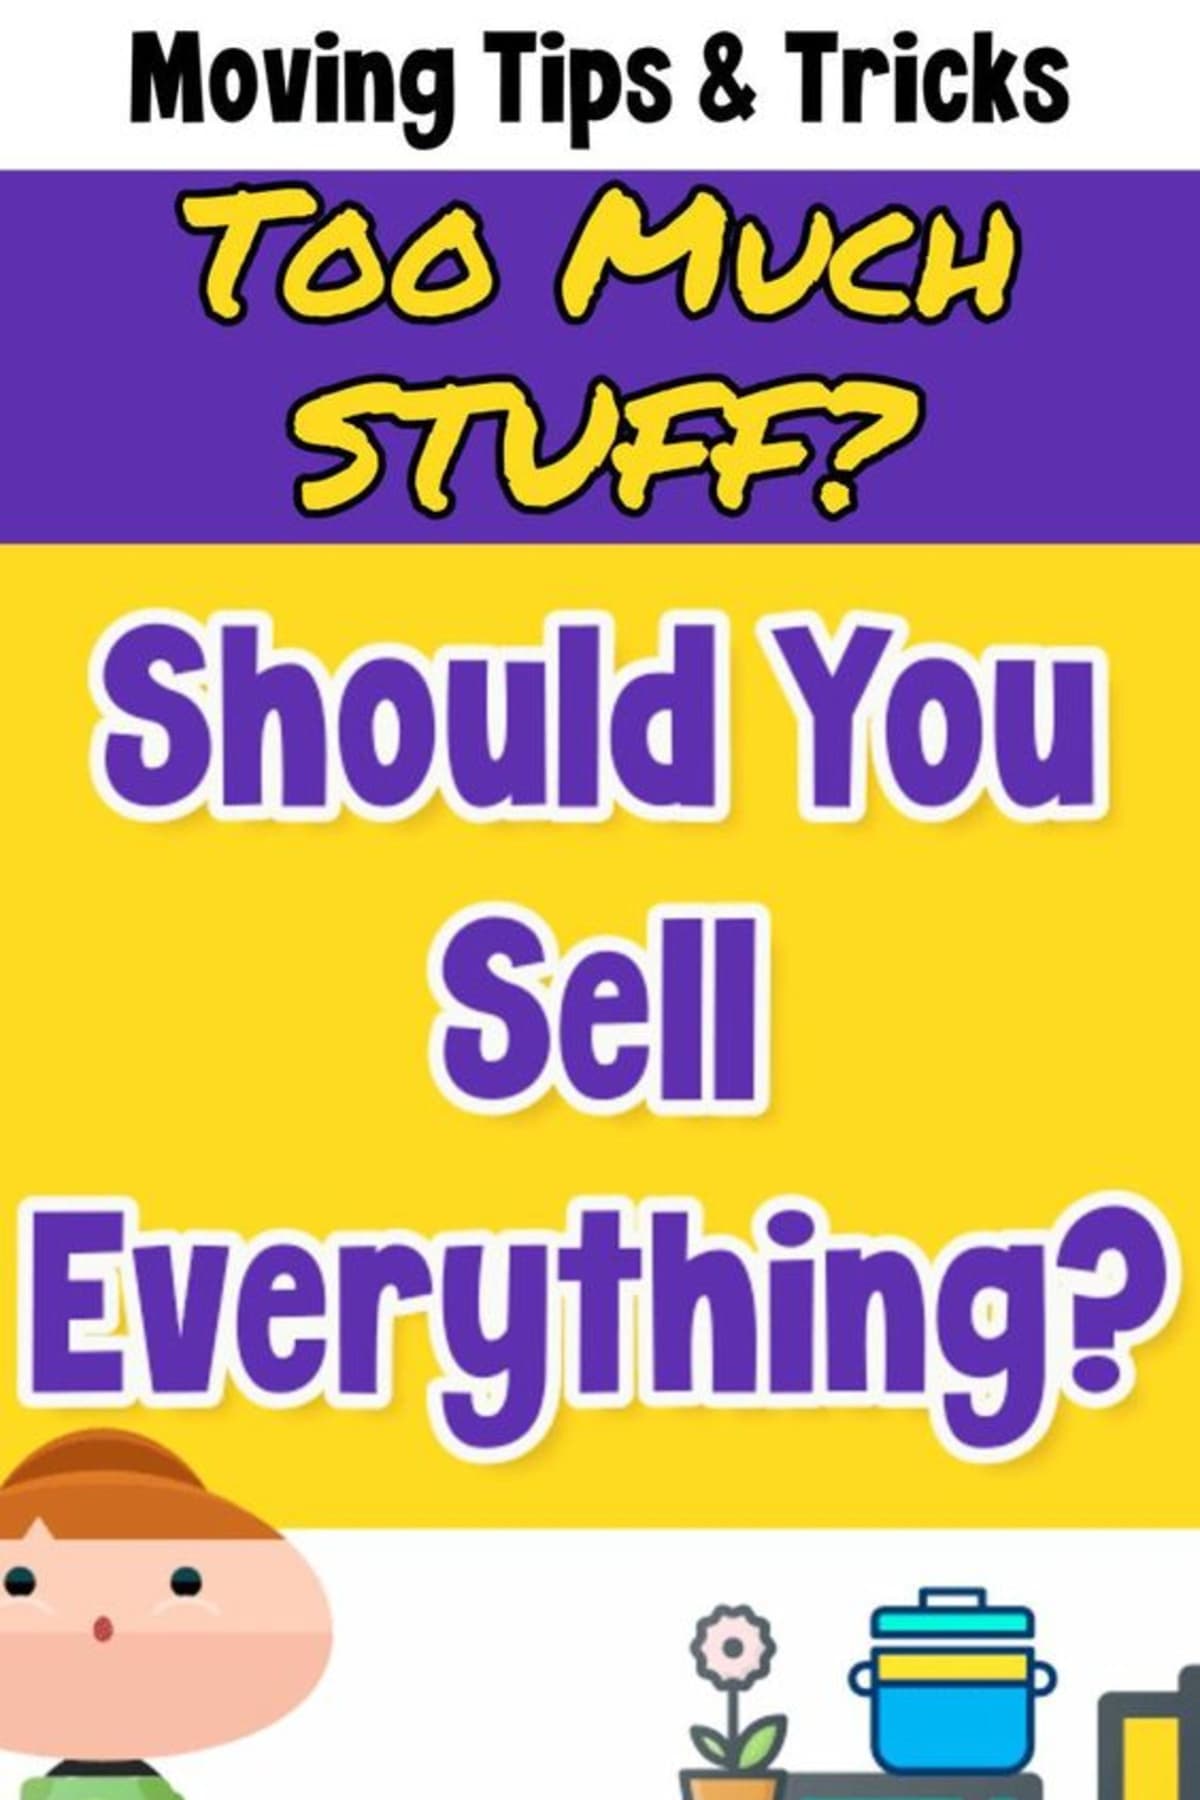 Moving Tips and Tricks - Too Much STUFF? Should You Sell EVERYTHING?